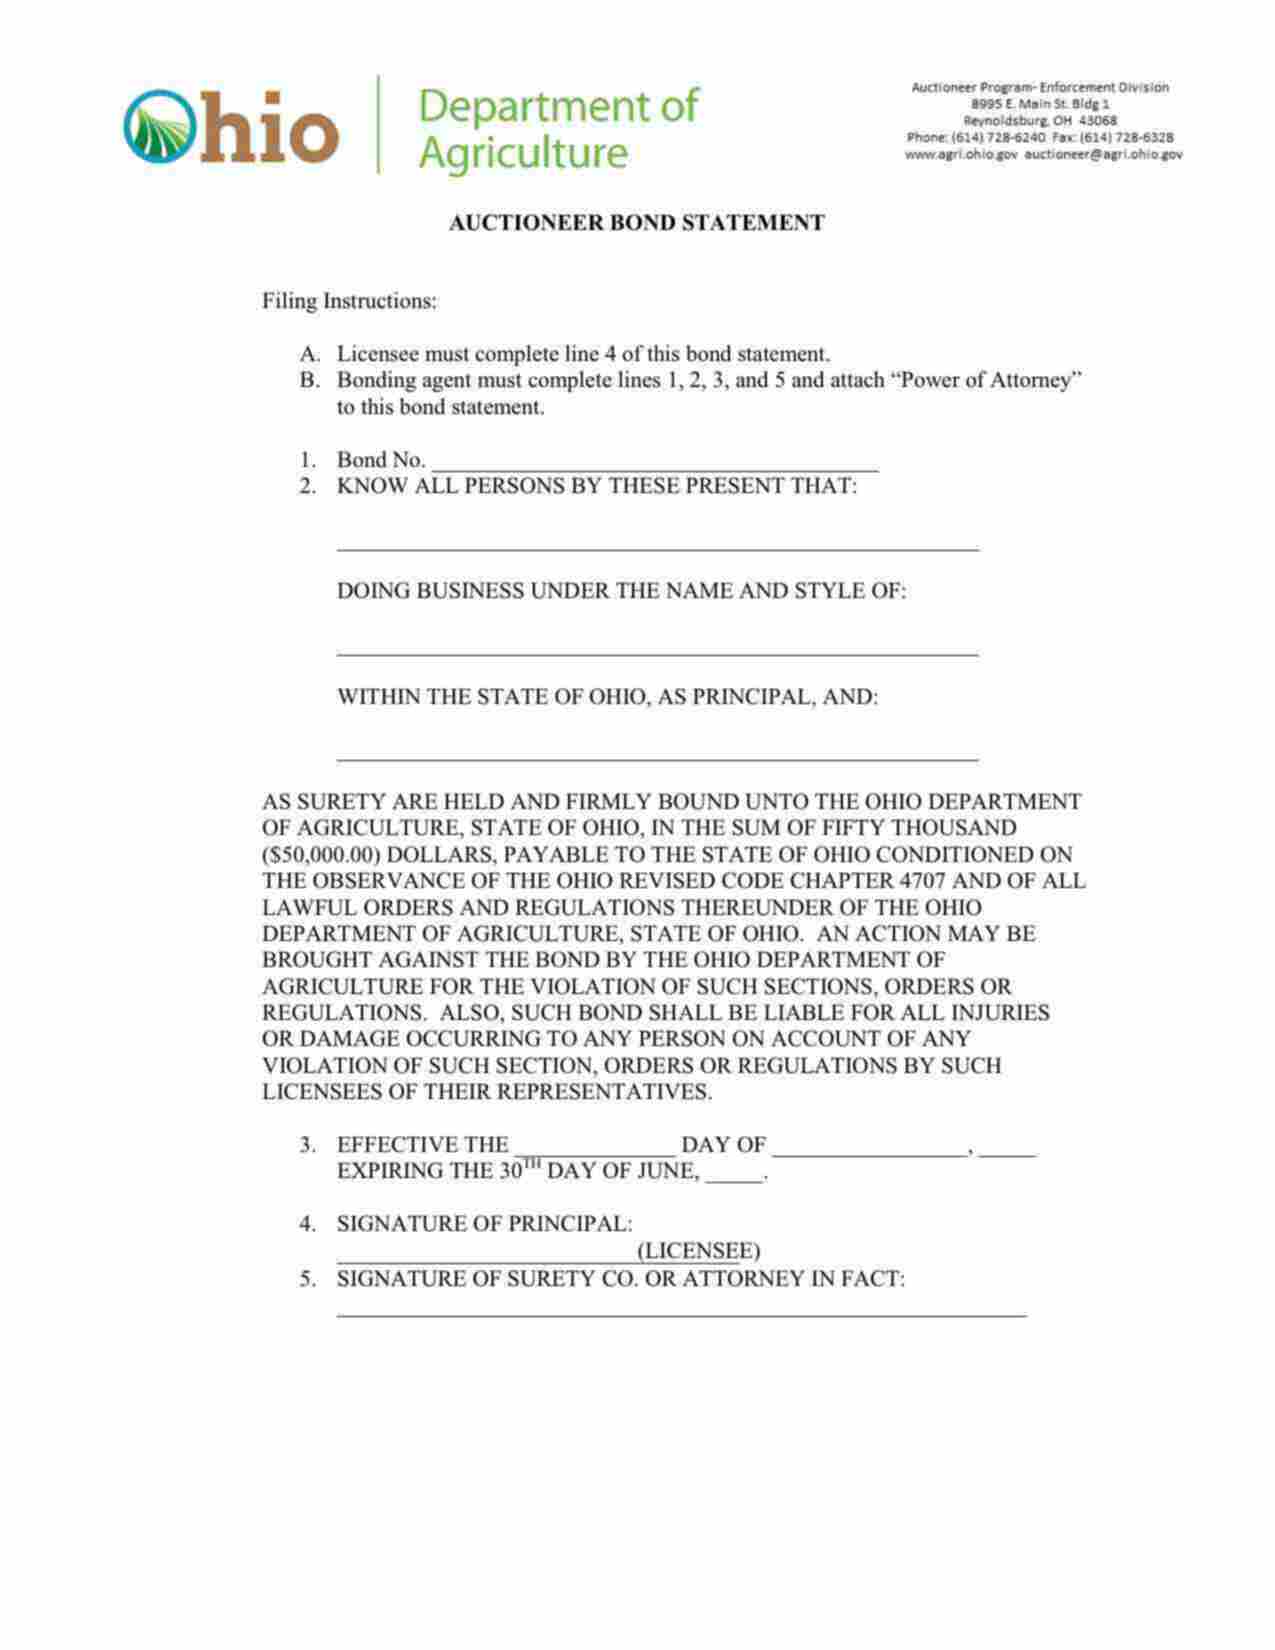 Ohio One-Time Auctioneer Bond Form